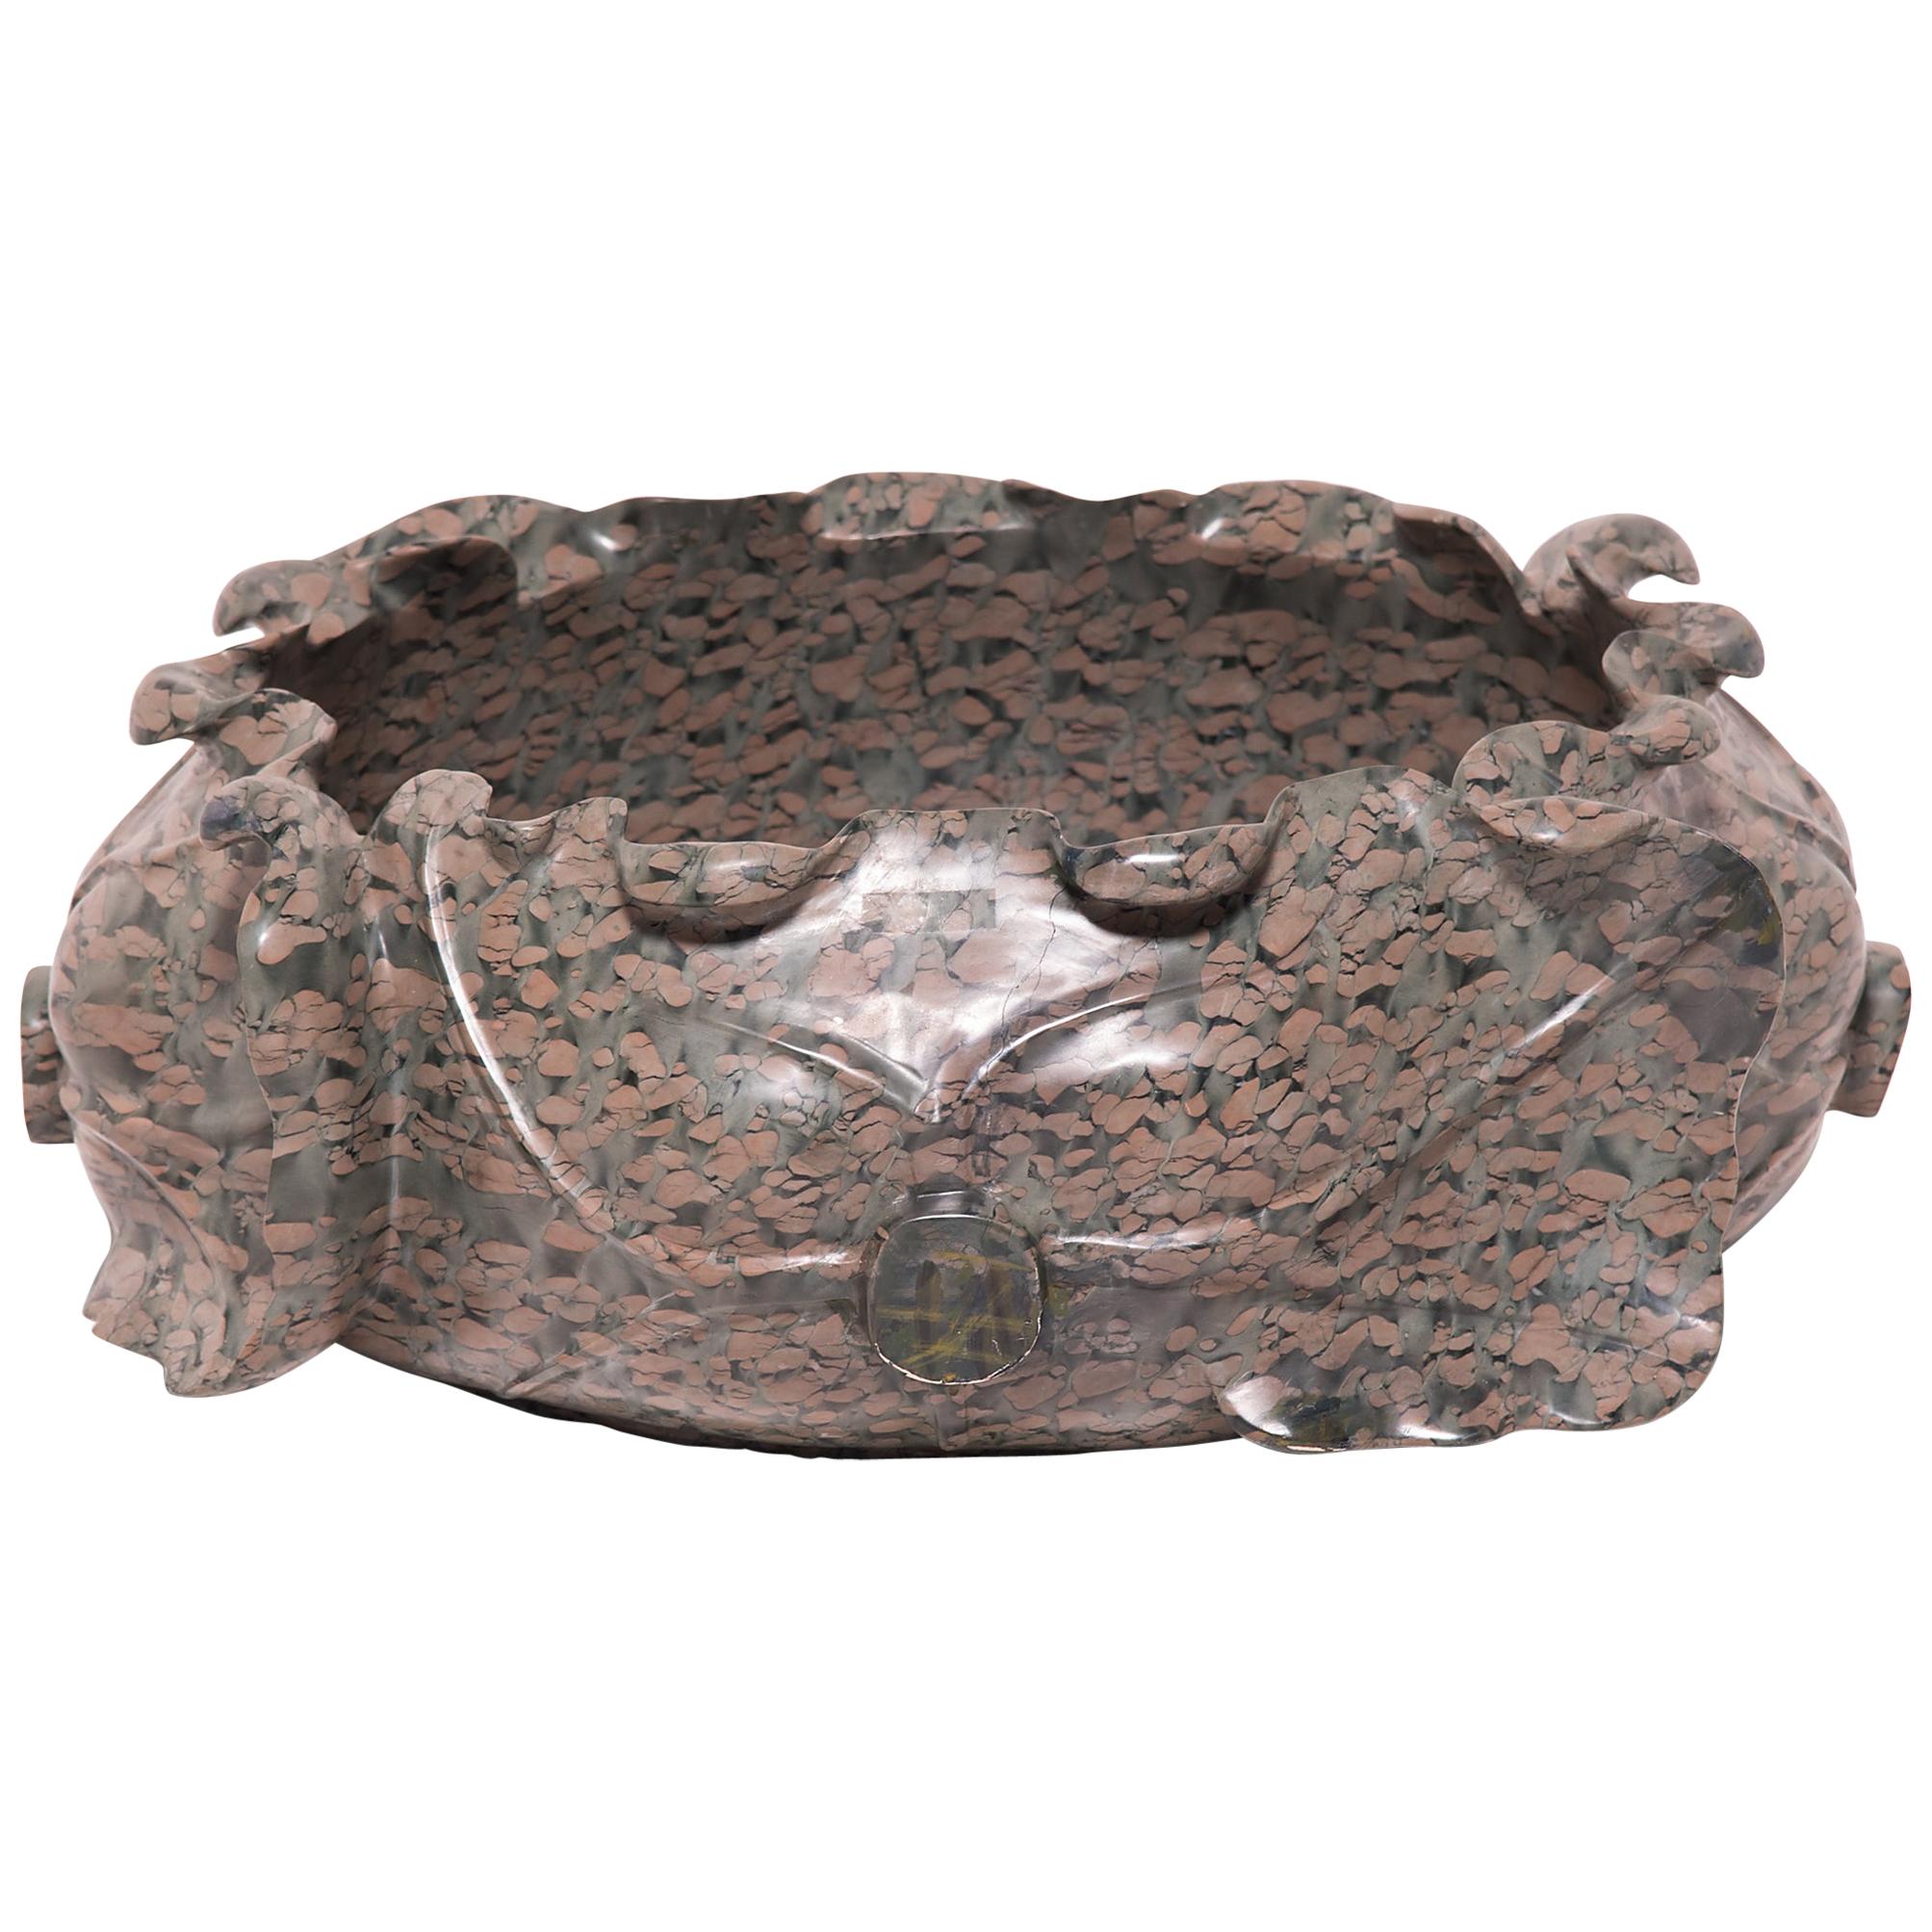 Hand Carved Chinese Lotus Form Stone Basin